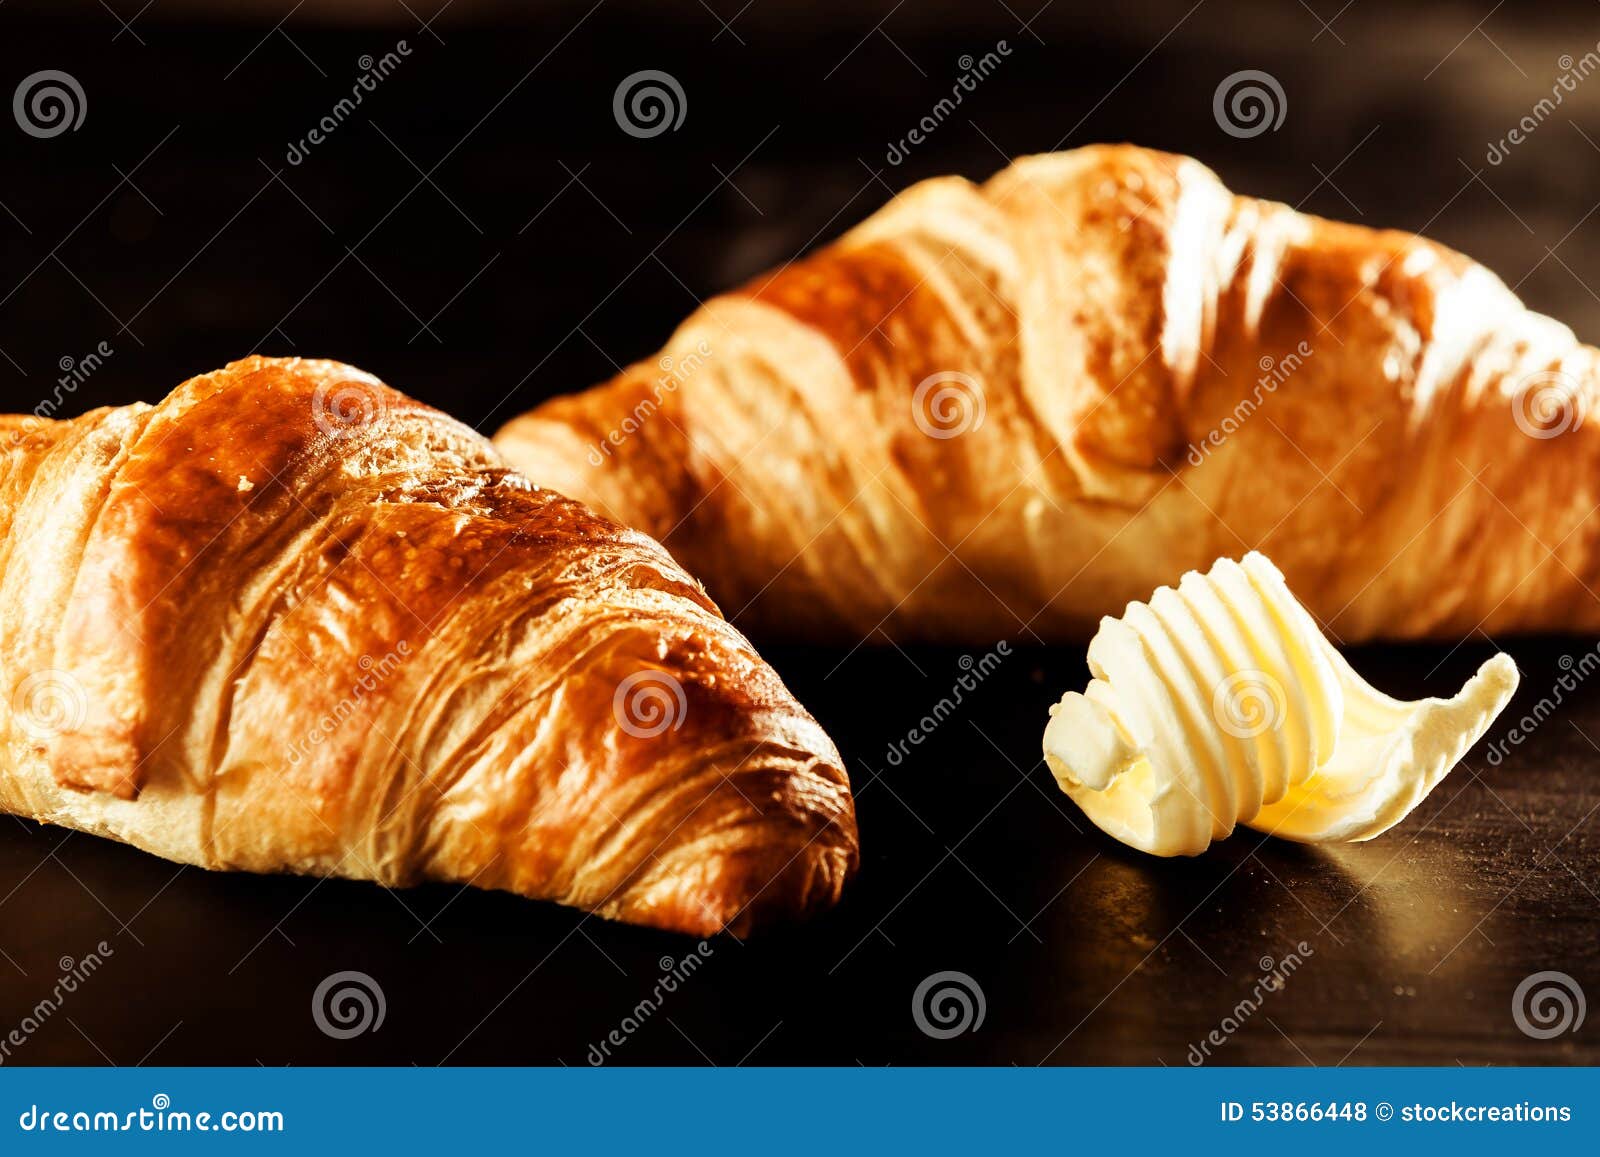 butter and croissant bread on top of a table